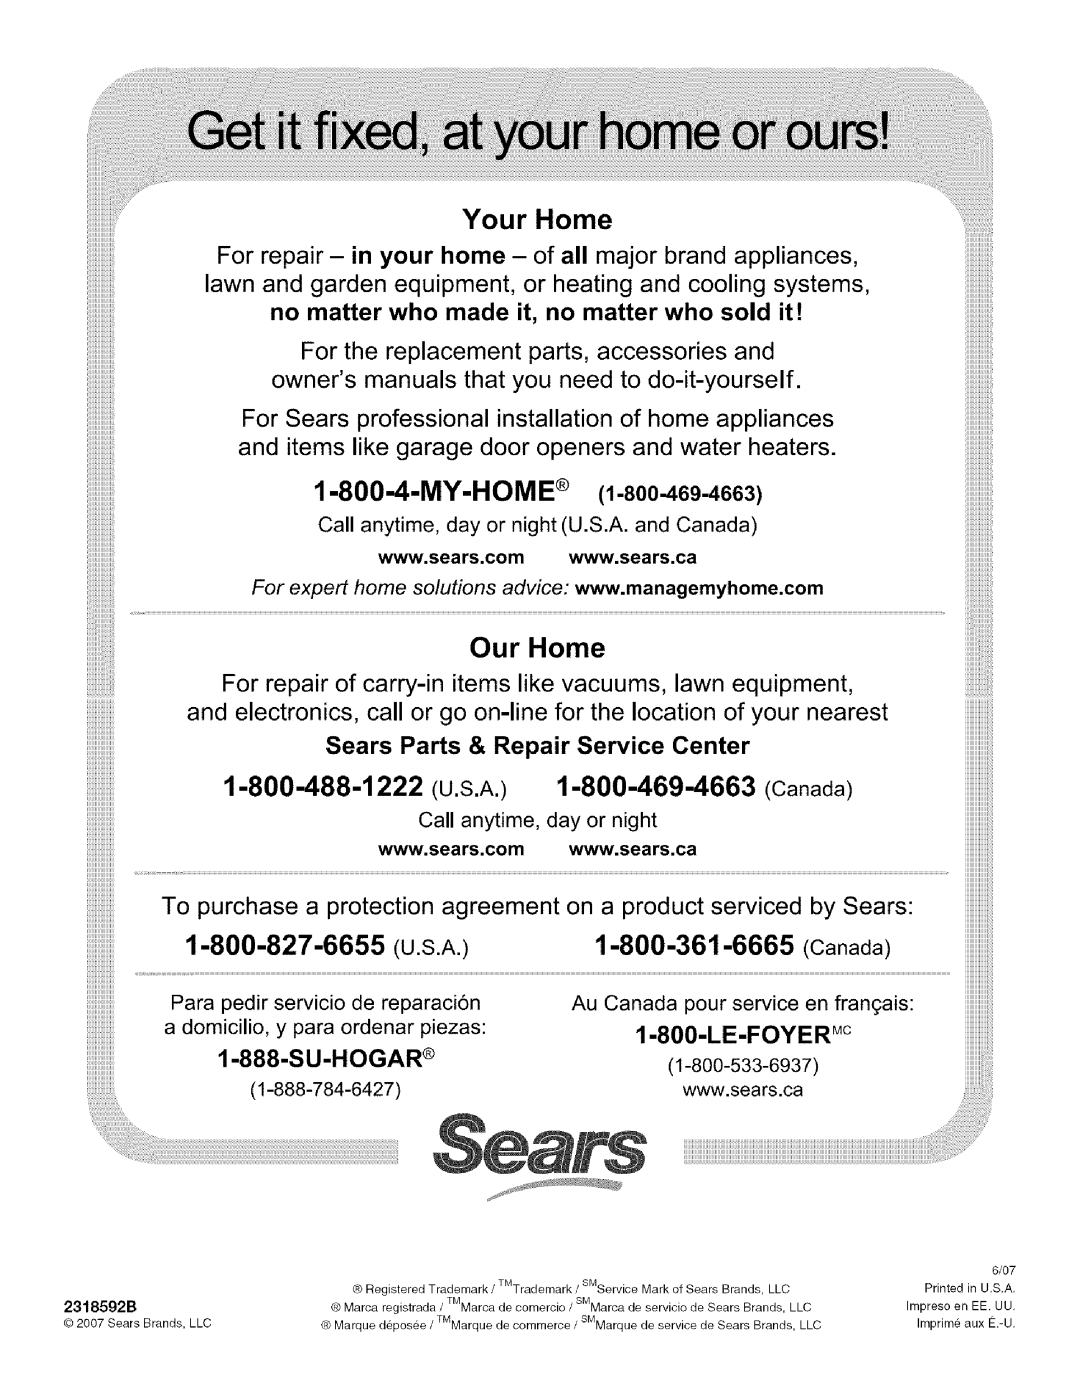 Kenmore 106.57022601 in your, home, made, it, no matter, sold, that you, Sears, Parts, Repair Service, Center, My-Home 